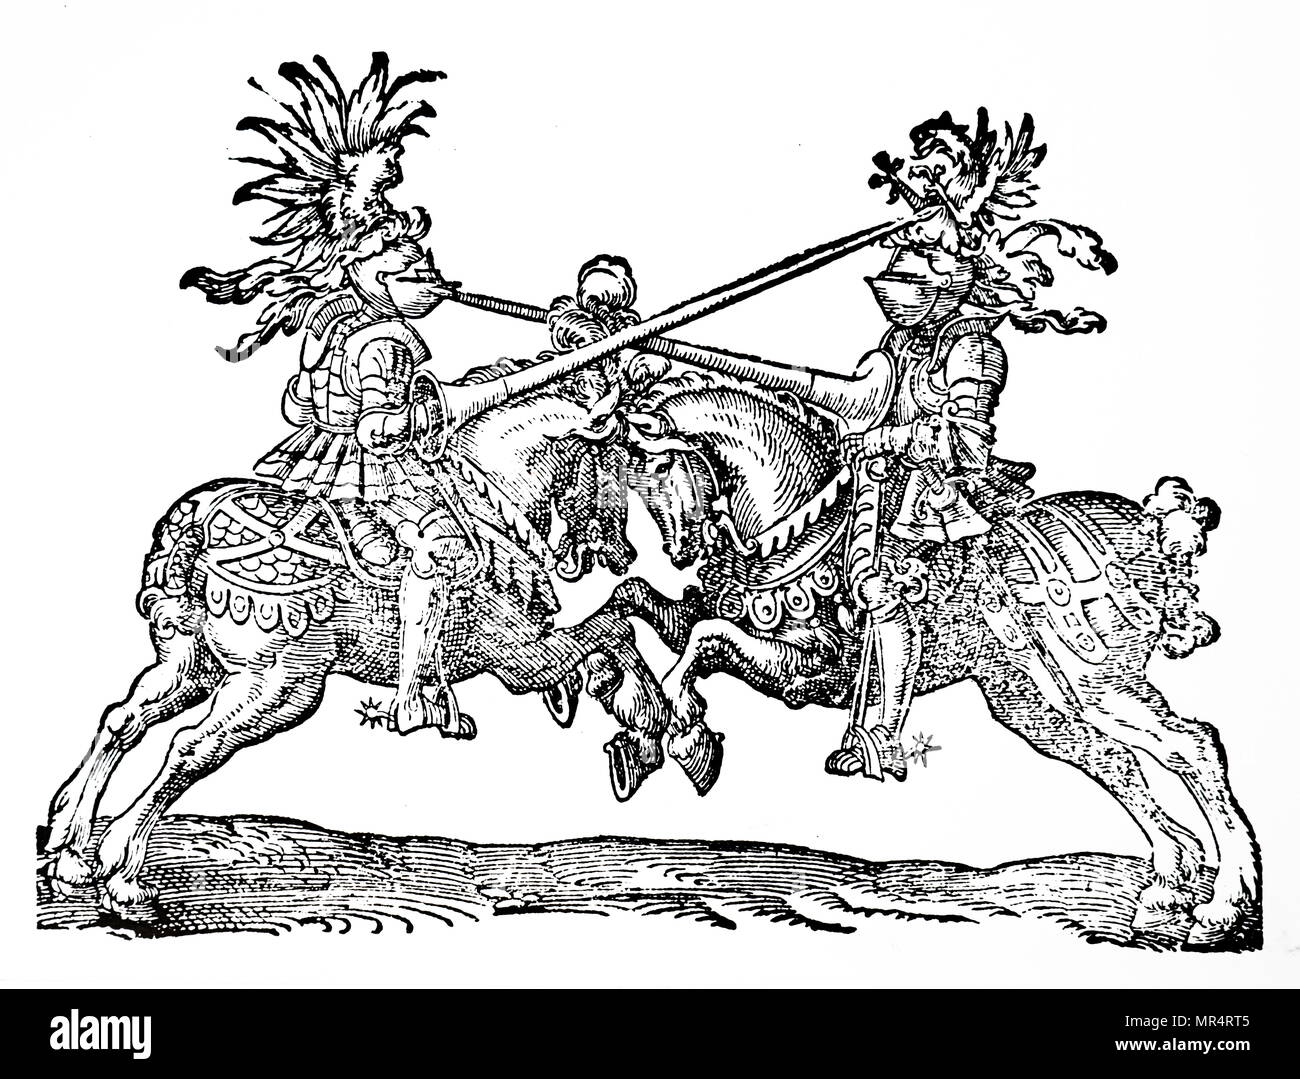 Woodcut print depicting knights jousting at a tournament. Print by Jost Amman (1539-1591) a Swiss-German artist, celebrated chiefly for his woodcuts, done mainly for book illustrations. Dated 16th century Stock Photo